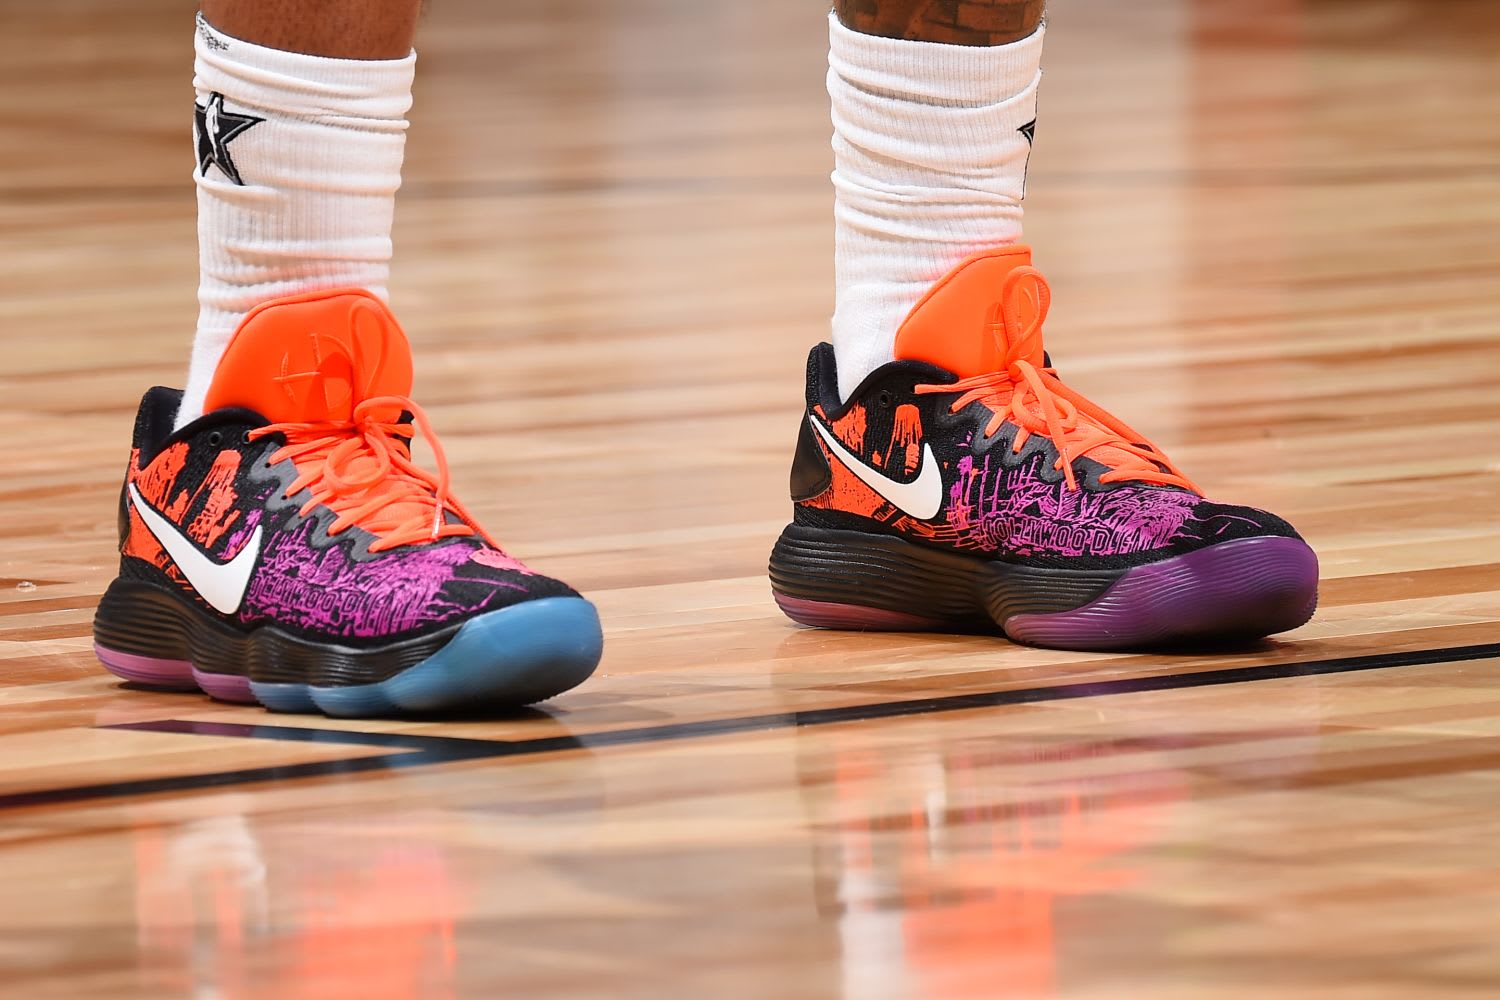 PHOTOS: Paul George's All-Star uniform and Nike shoes